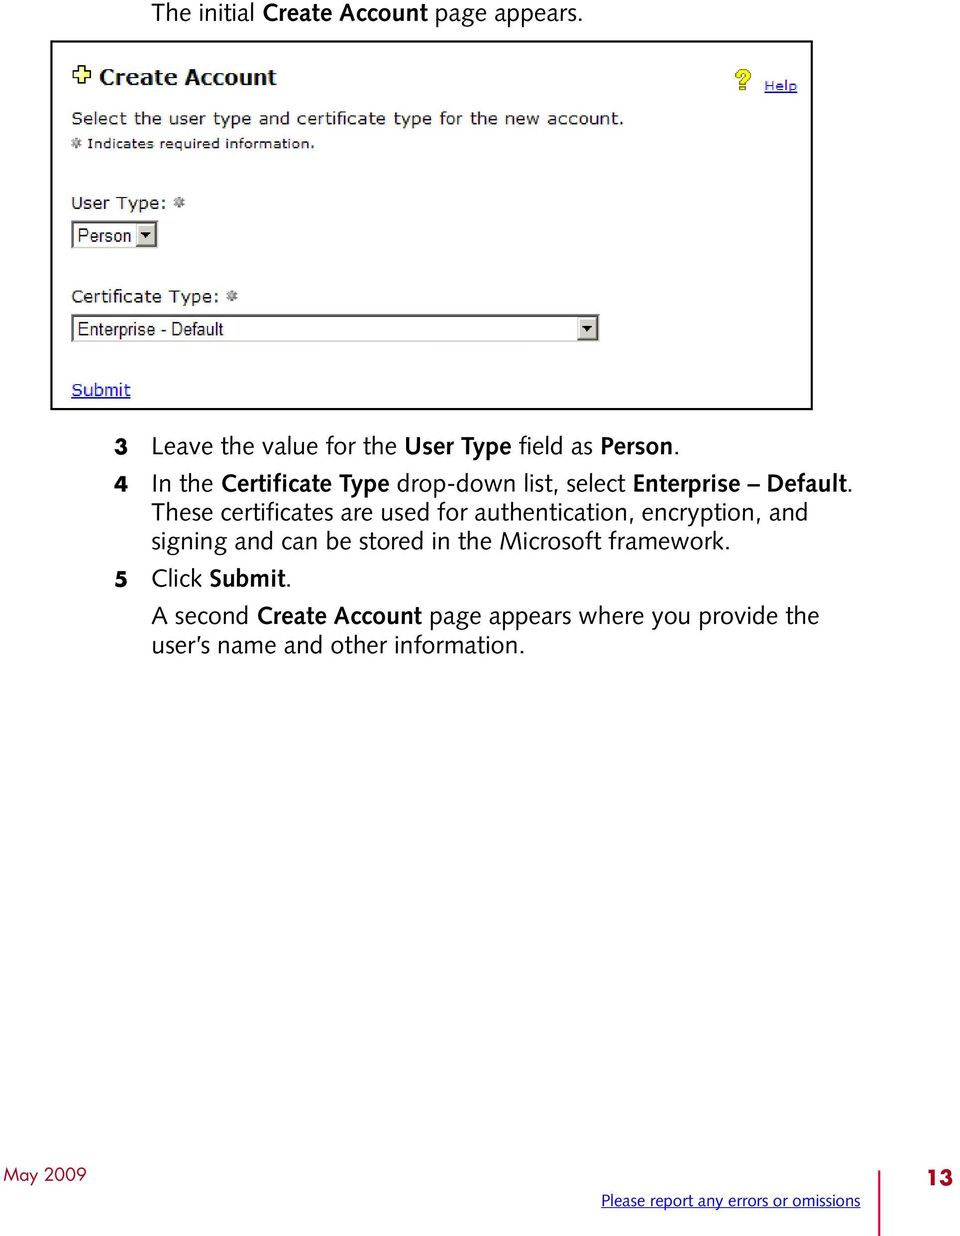 These certificates are used for authentication, encryption, and signing and can be stored in the